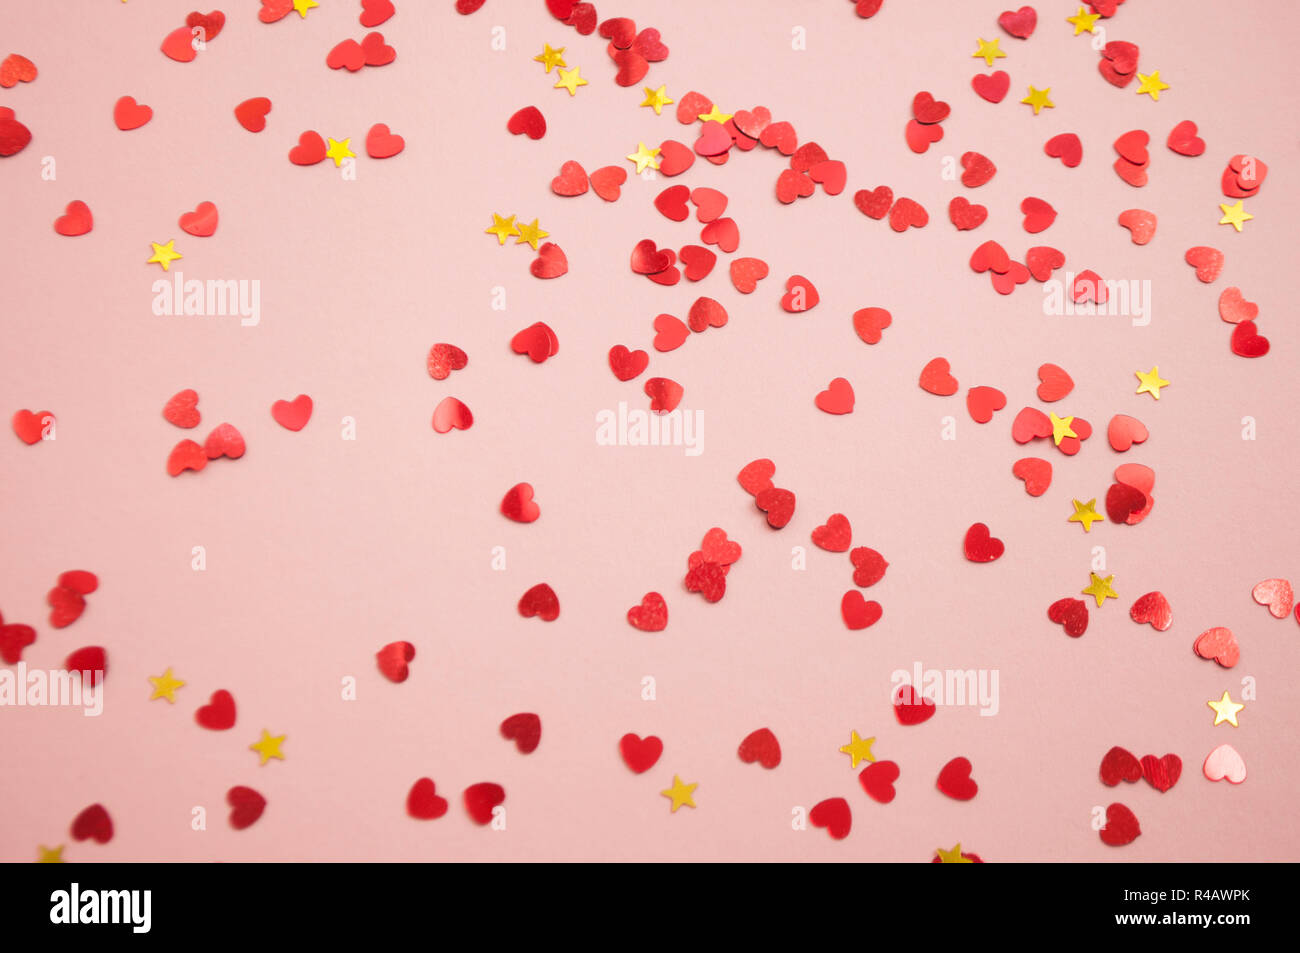 Defocused beautiful hearts and stars shaped red confetti on pink background. Stock Photo